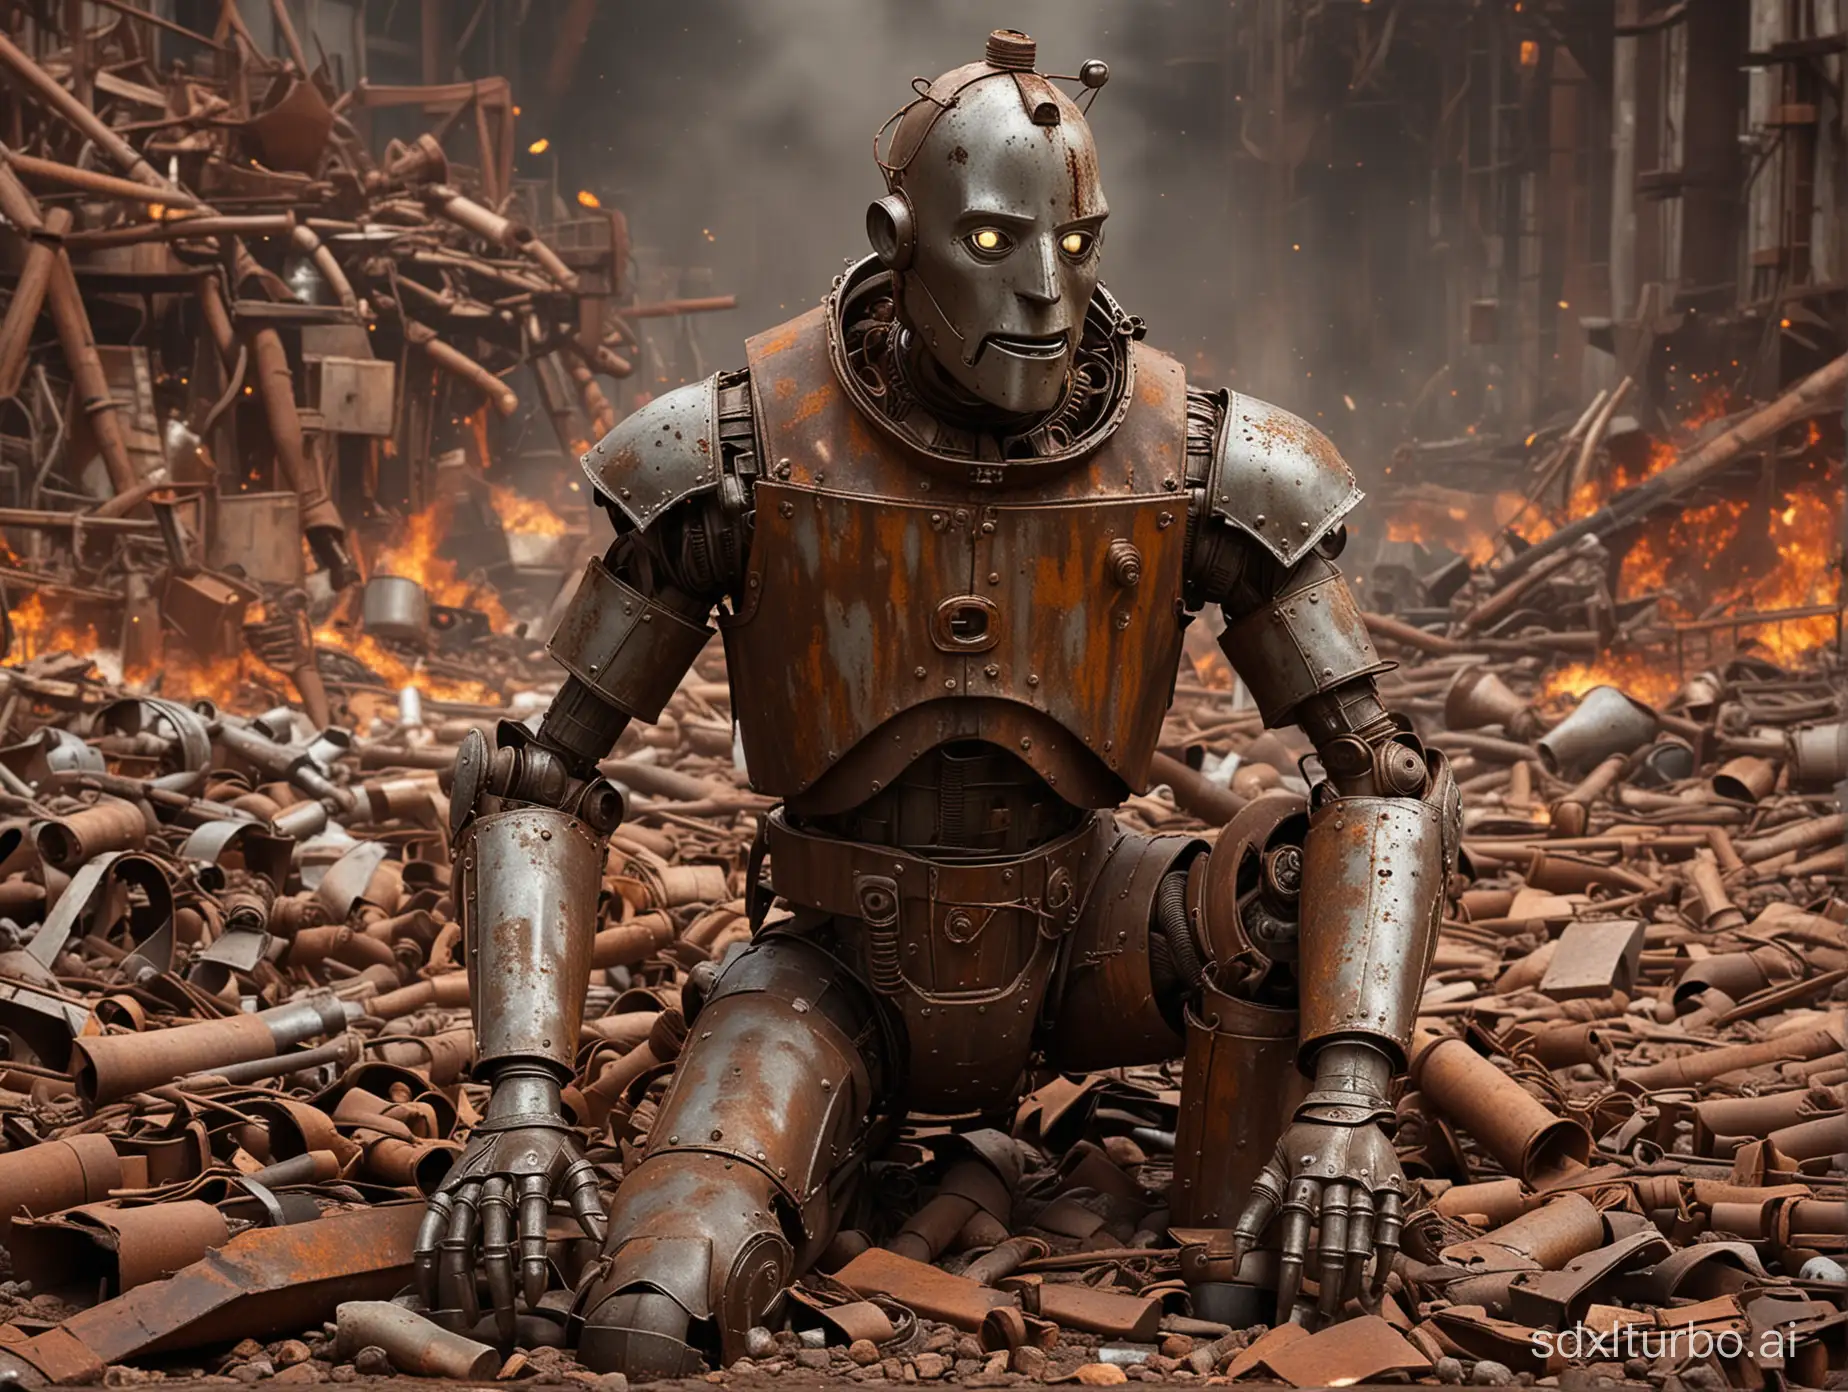 The rusty Tin Man character from The Wizard of Oz is rusted and dumped on a pile of rusty scrap metal parts ready to be incinerated in a blast furnace
A highly realistic clear high resolution photo rendering.